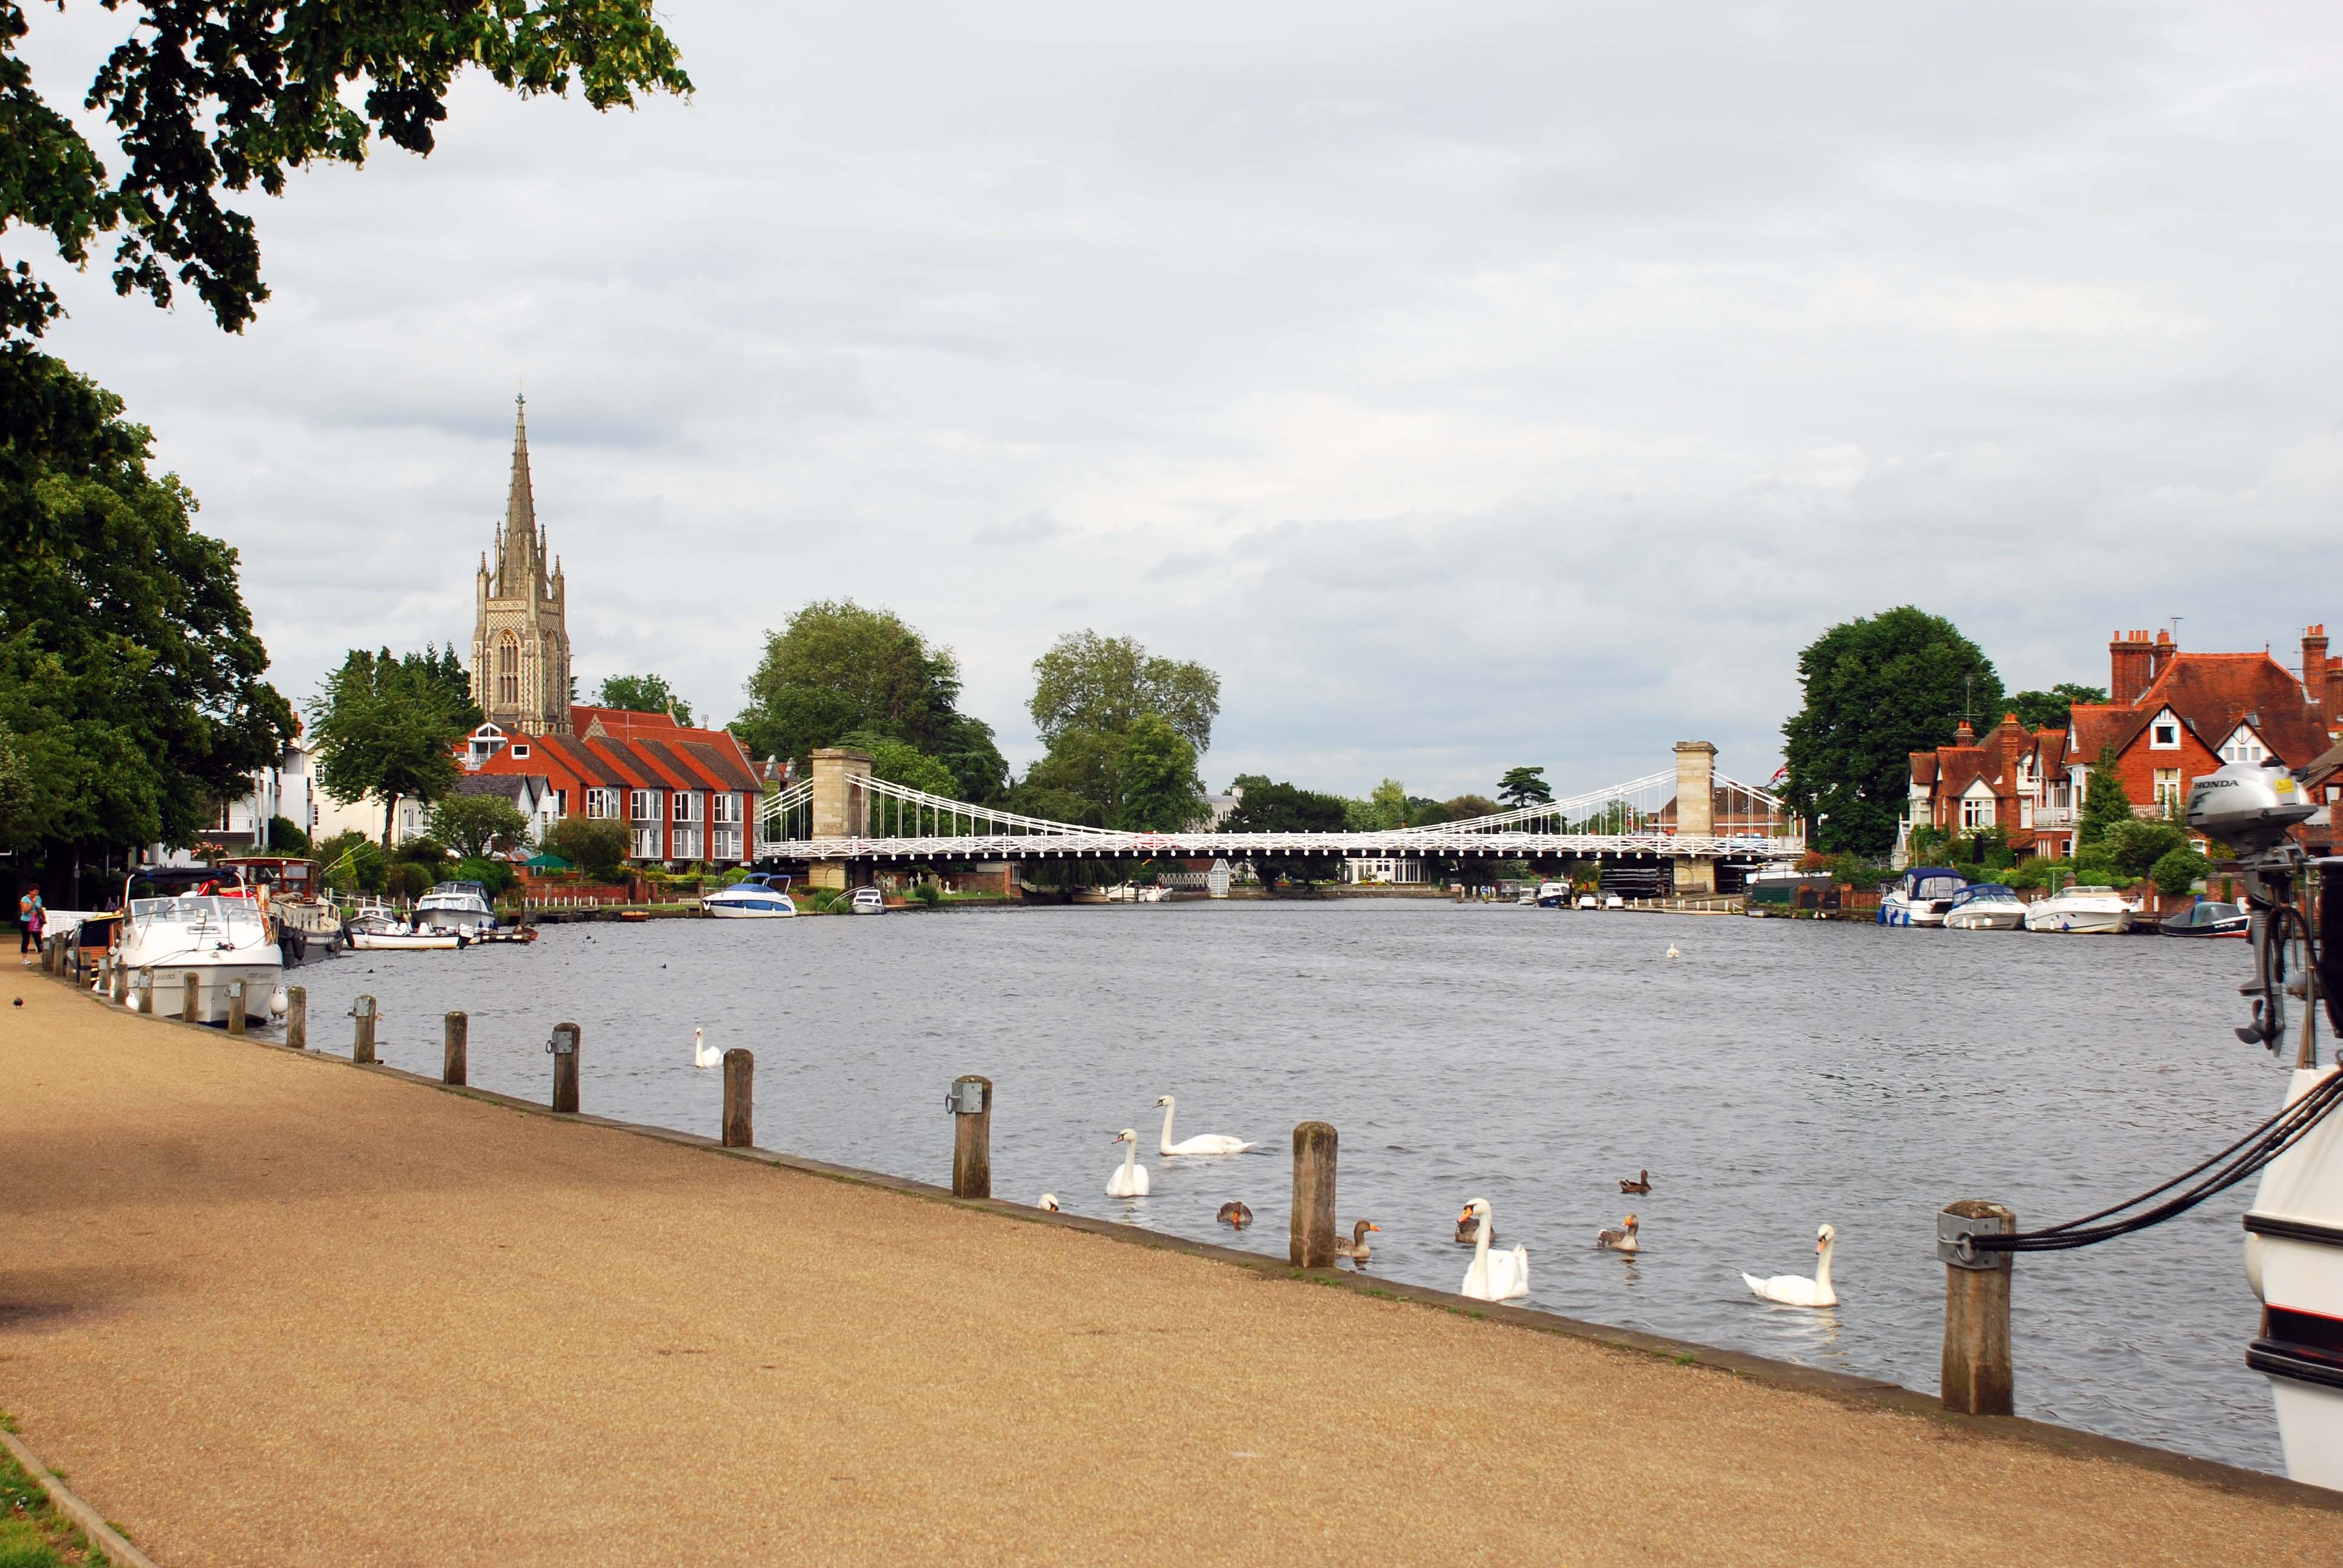 river trips marlow